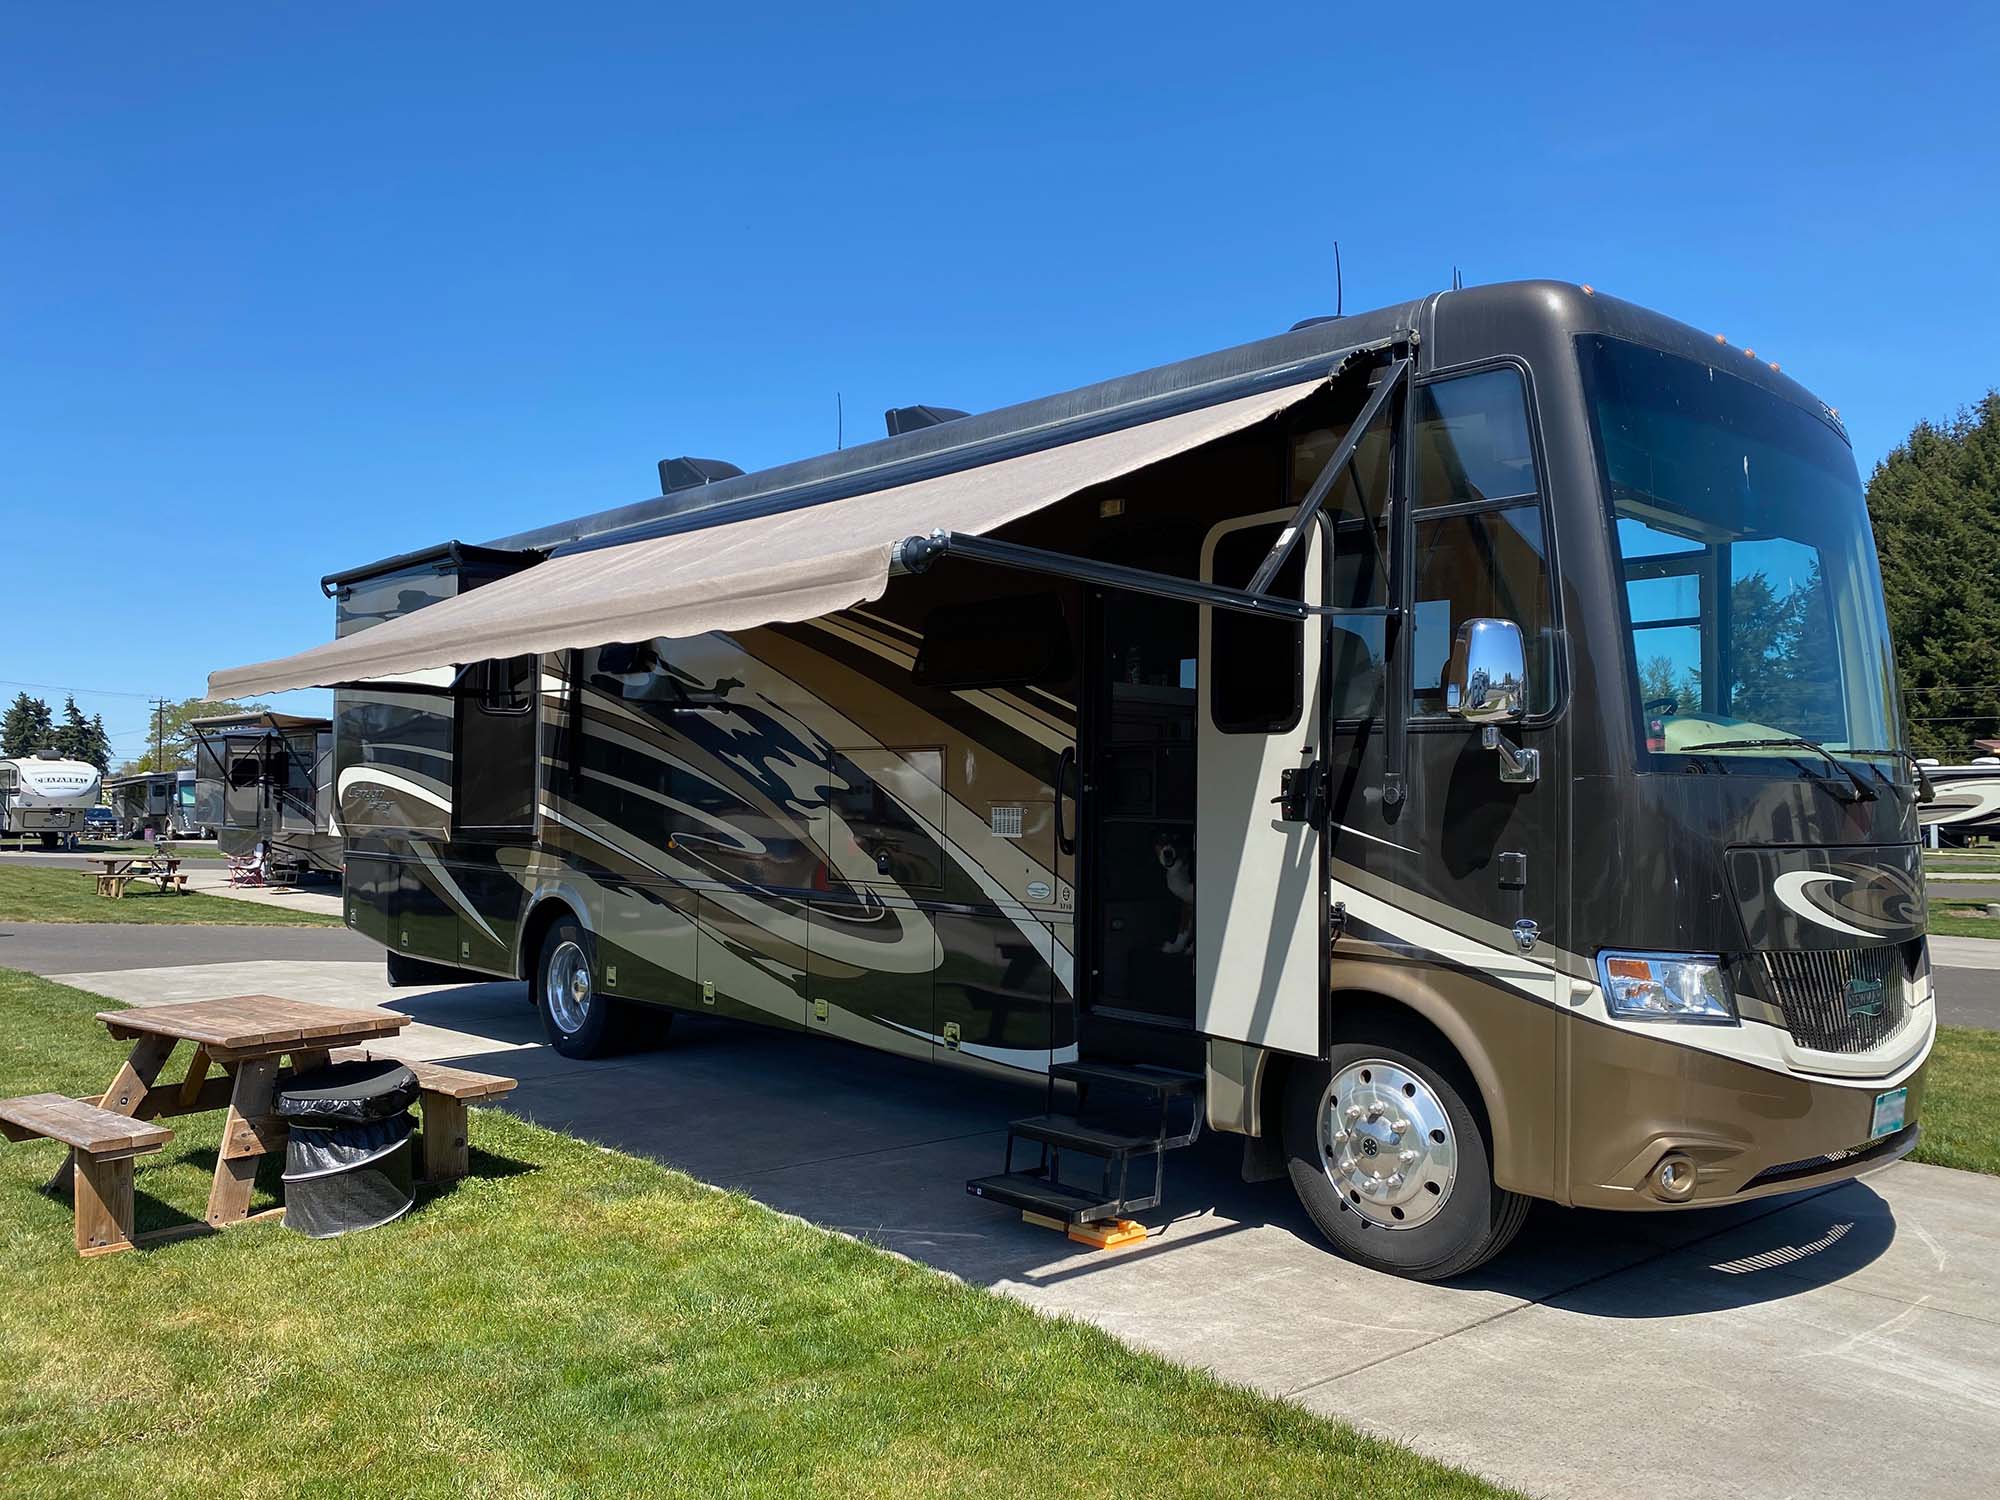 Review - RVshare, a Peer-to-Peer RV Rental Firm